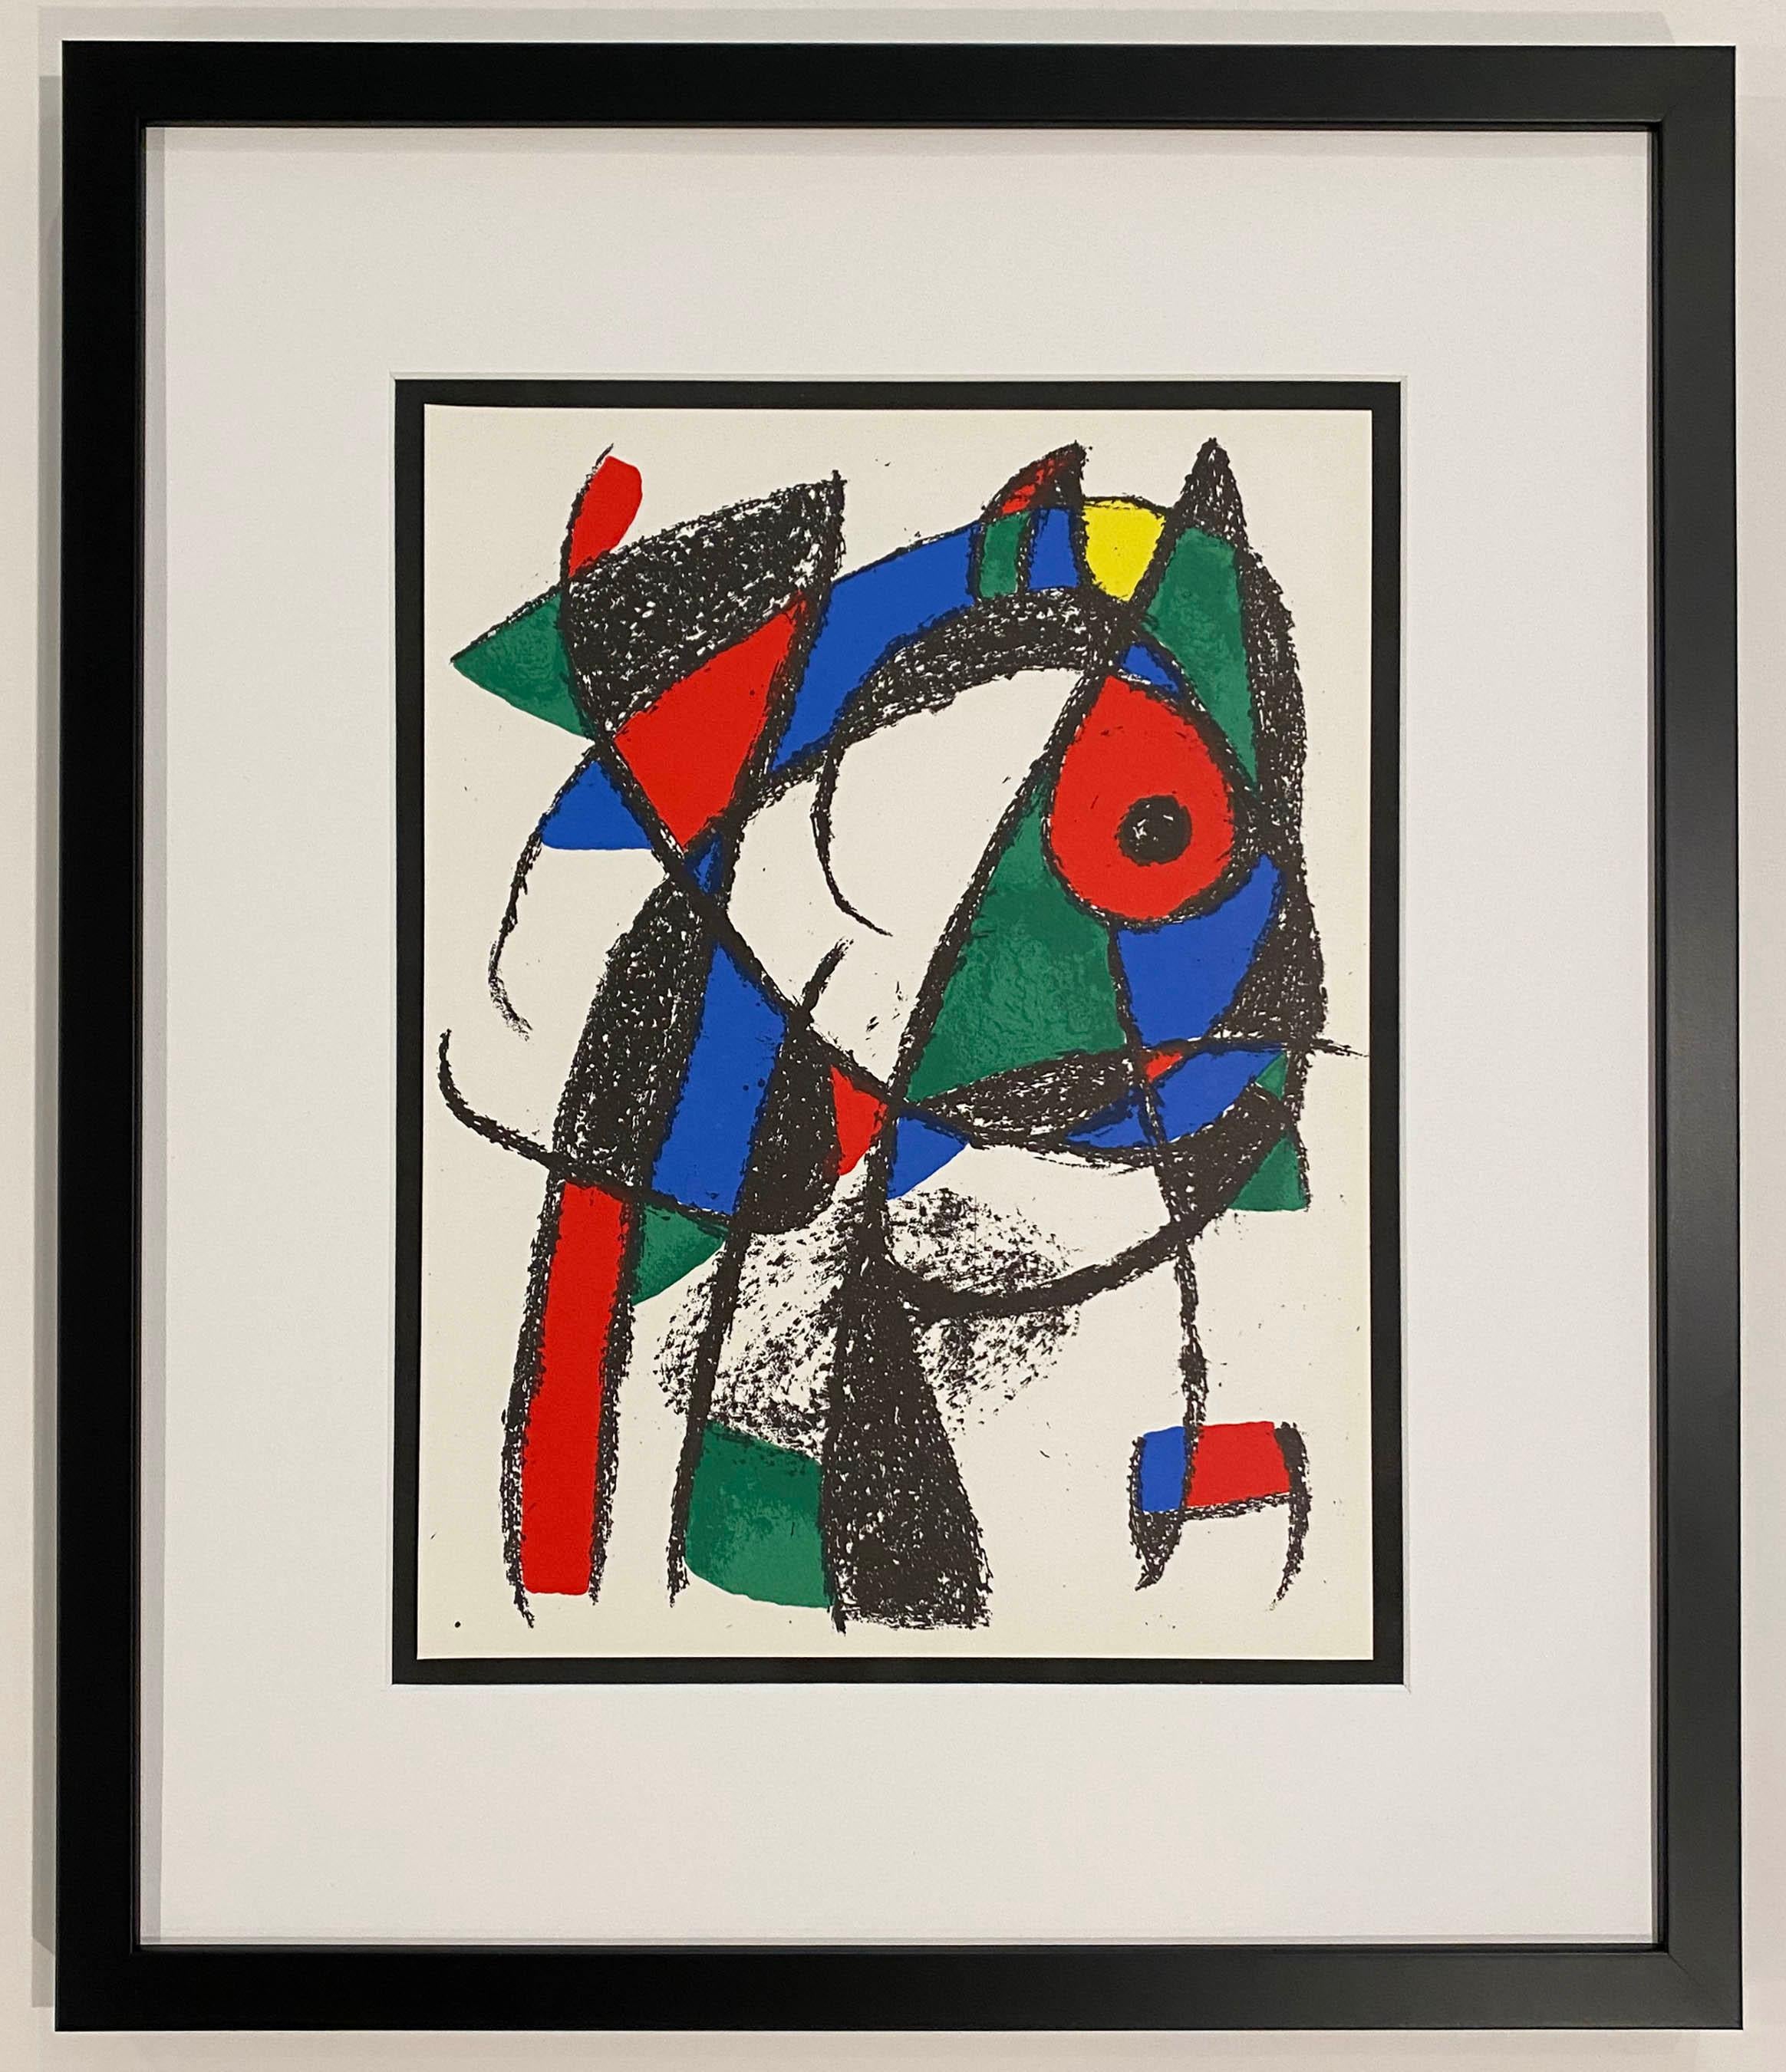 Plate I, from 1975 Lithographe II - Print by Joan Miró